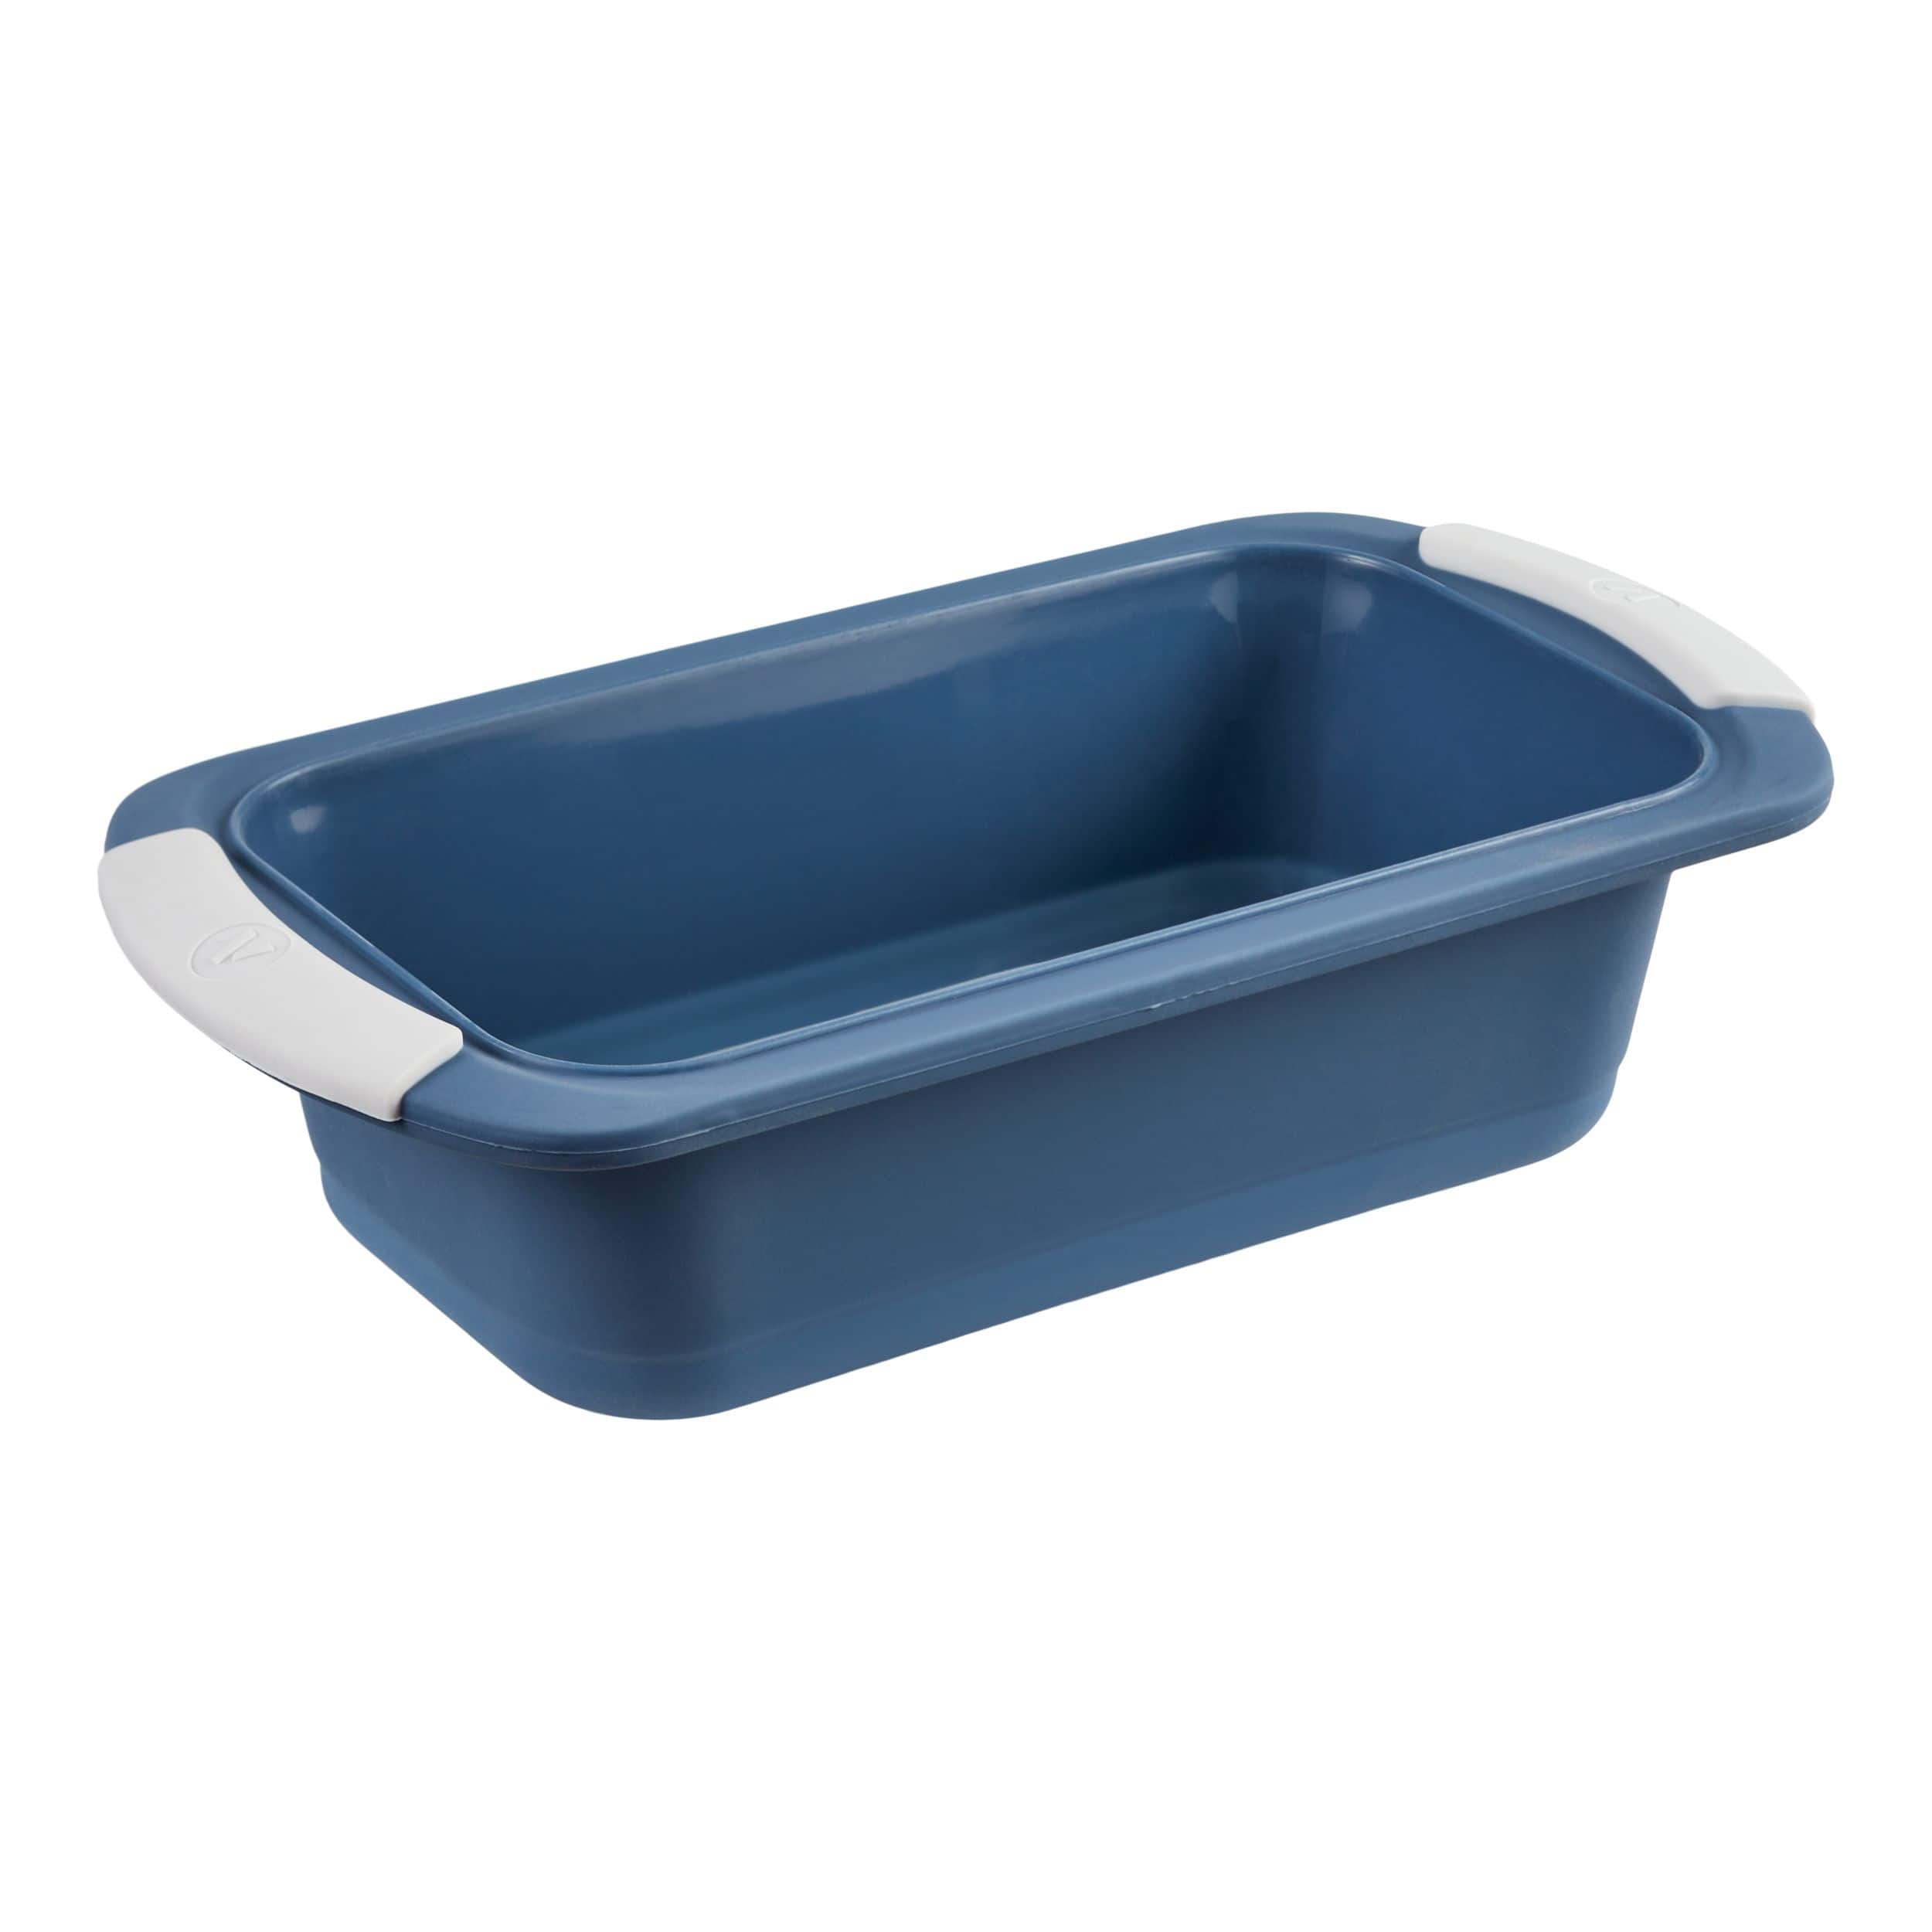 https://media-www.canadiantire.ca/product/living/kitchen/bakeware-baking-prep/1429689/vida-silicone-with-structure-loaf-pan-2e81650d-c002-48b4-a573-abcfd8eadd01-jpgrendition.jpg